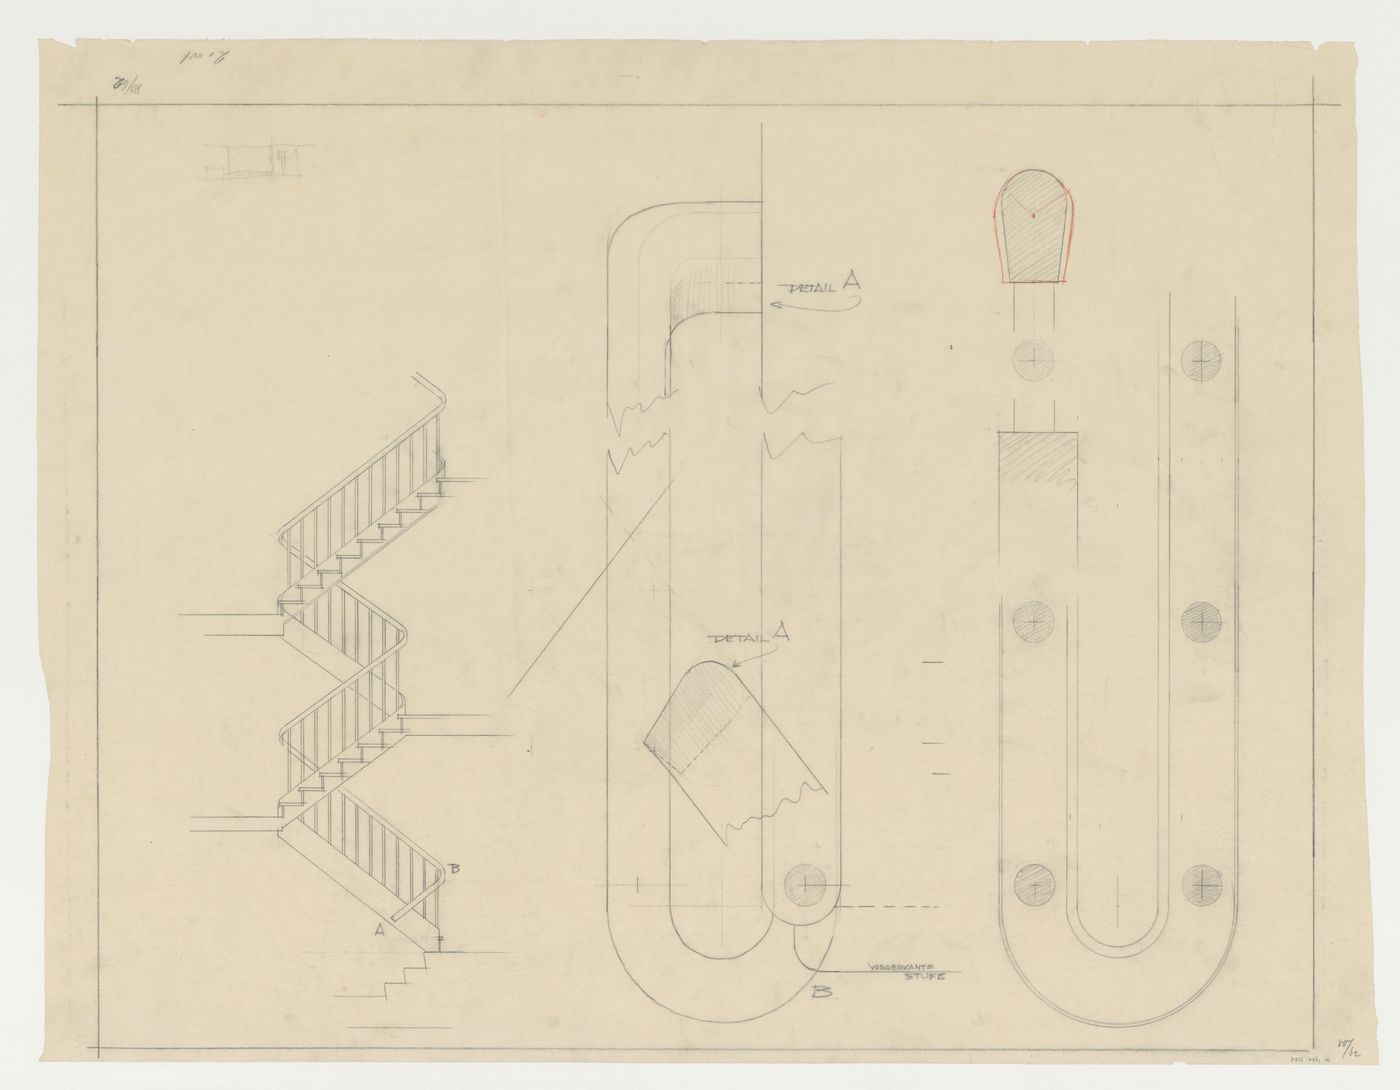 Elevation and sectional details for stairs and a balustrade, possibly for Hellerhof Housing Estate, Frankfurt am Main, Germany